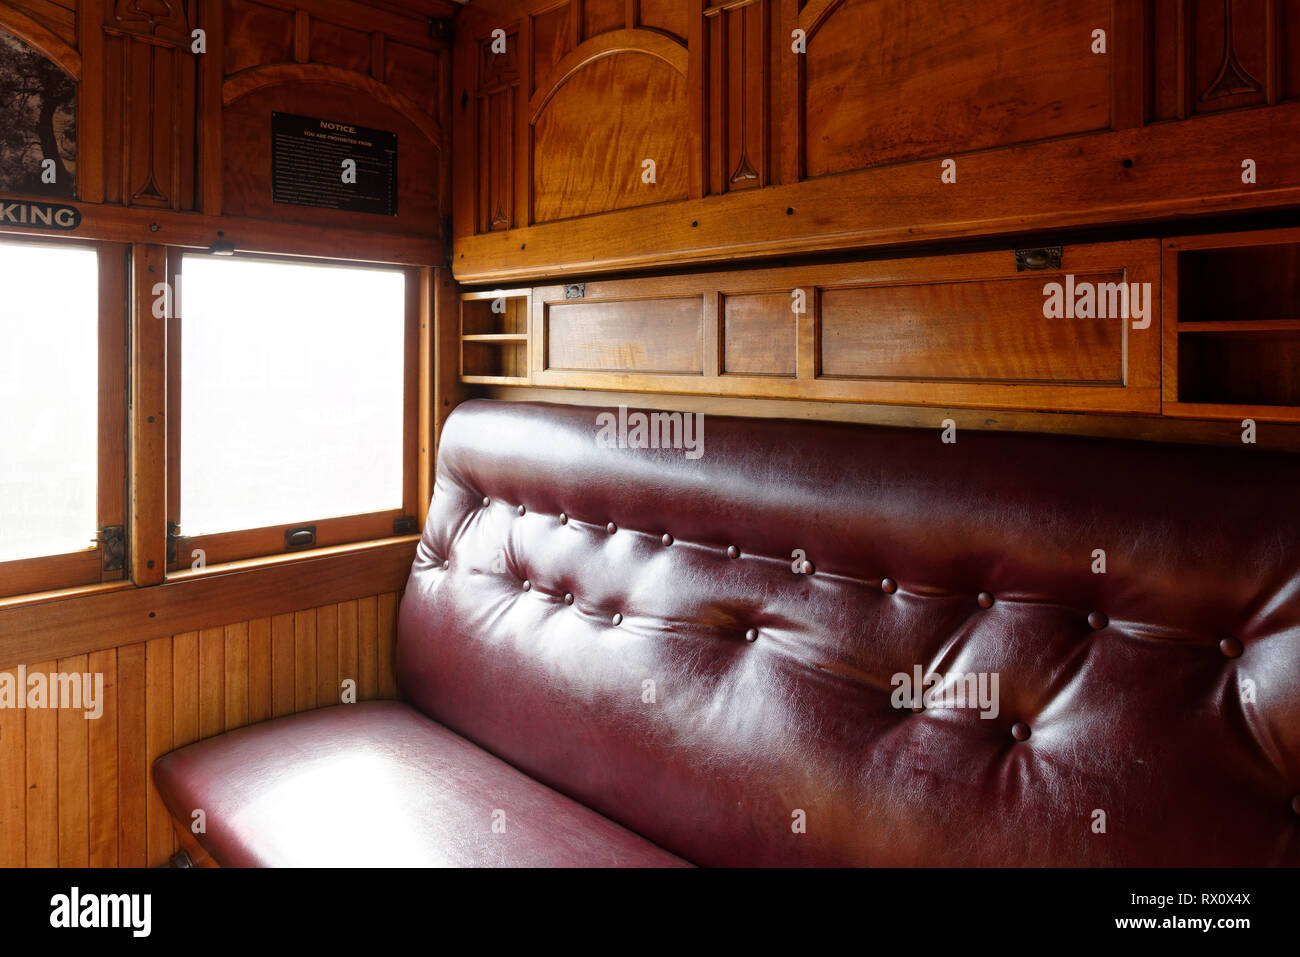 Art nouveau fittings and décor in a compartment of the Tambo Parlour Car, a first-class carriage built in 1919, Maldon railway station, Victoria, Aust Stock Photo